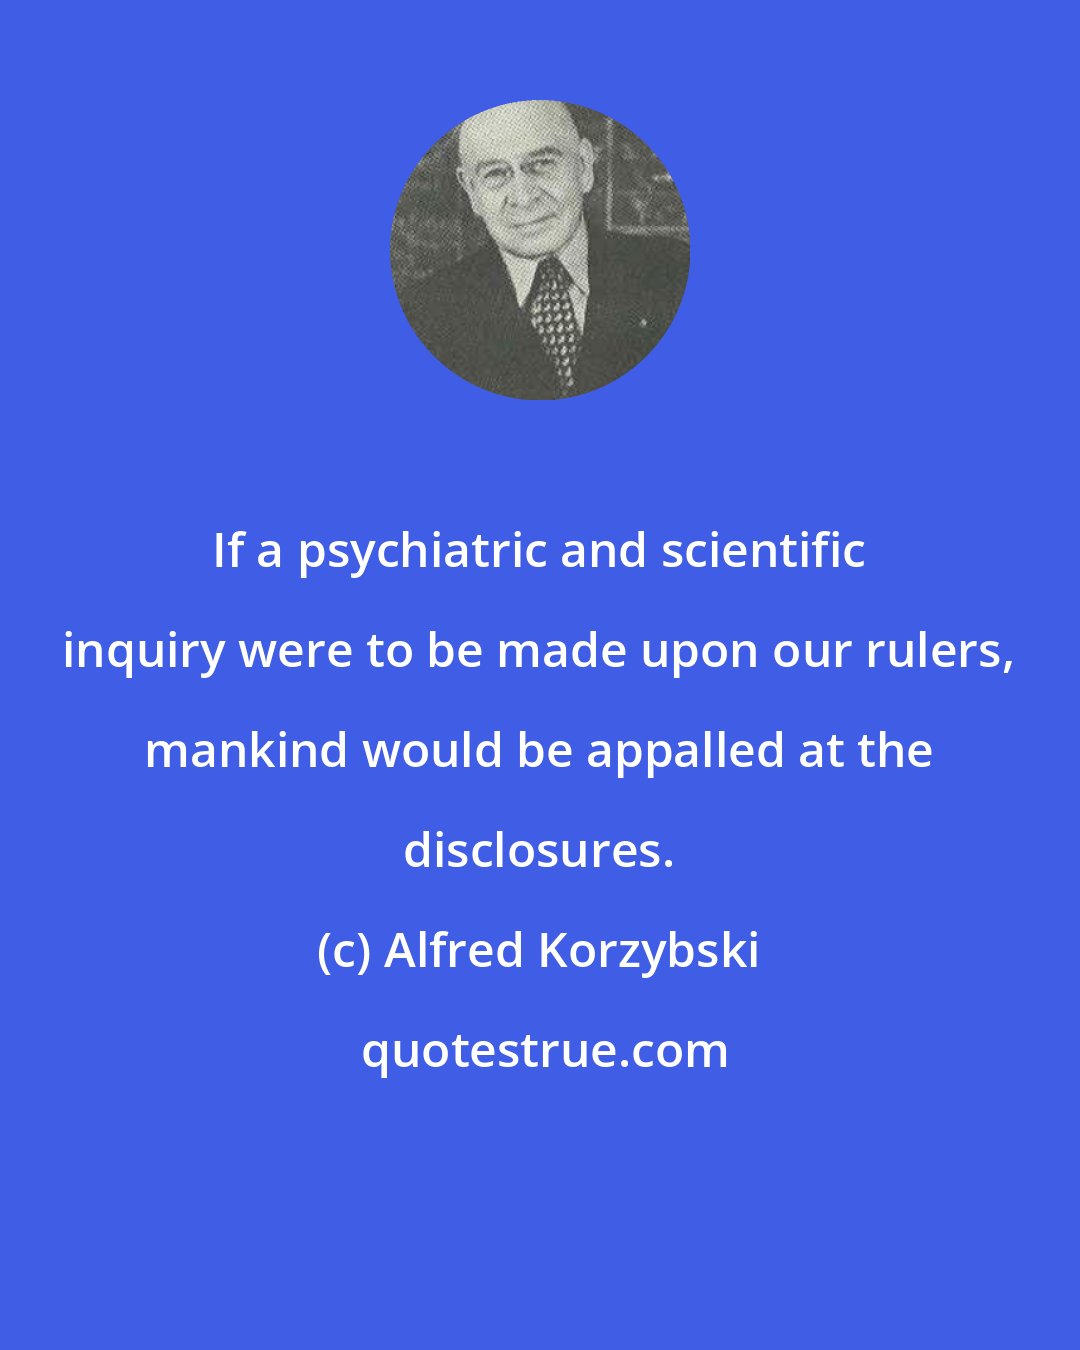 Alfred Korzybski: If a psychiatric and scientific inquiry were to be made upon our rulers, mankind would be appalled at the disclosures.